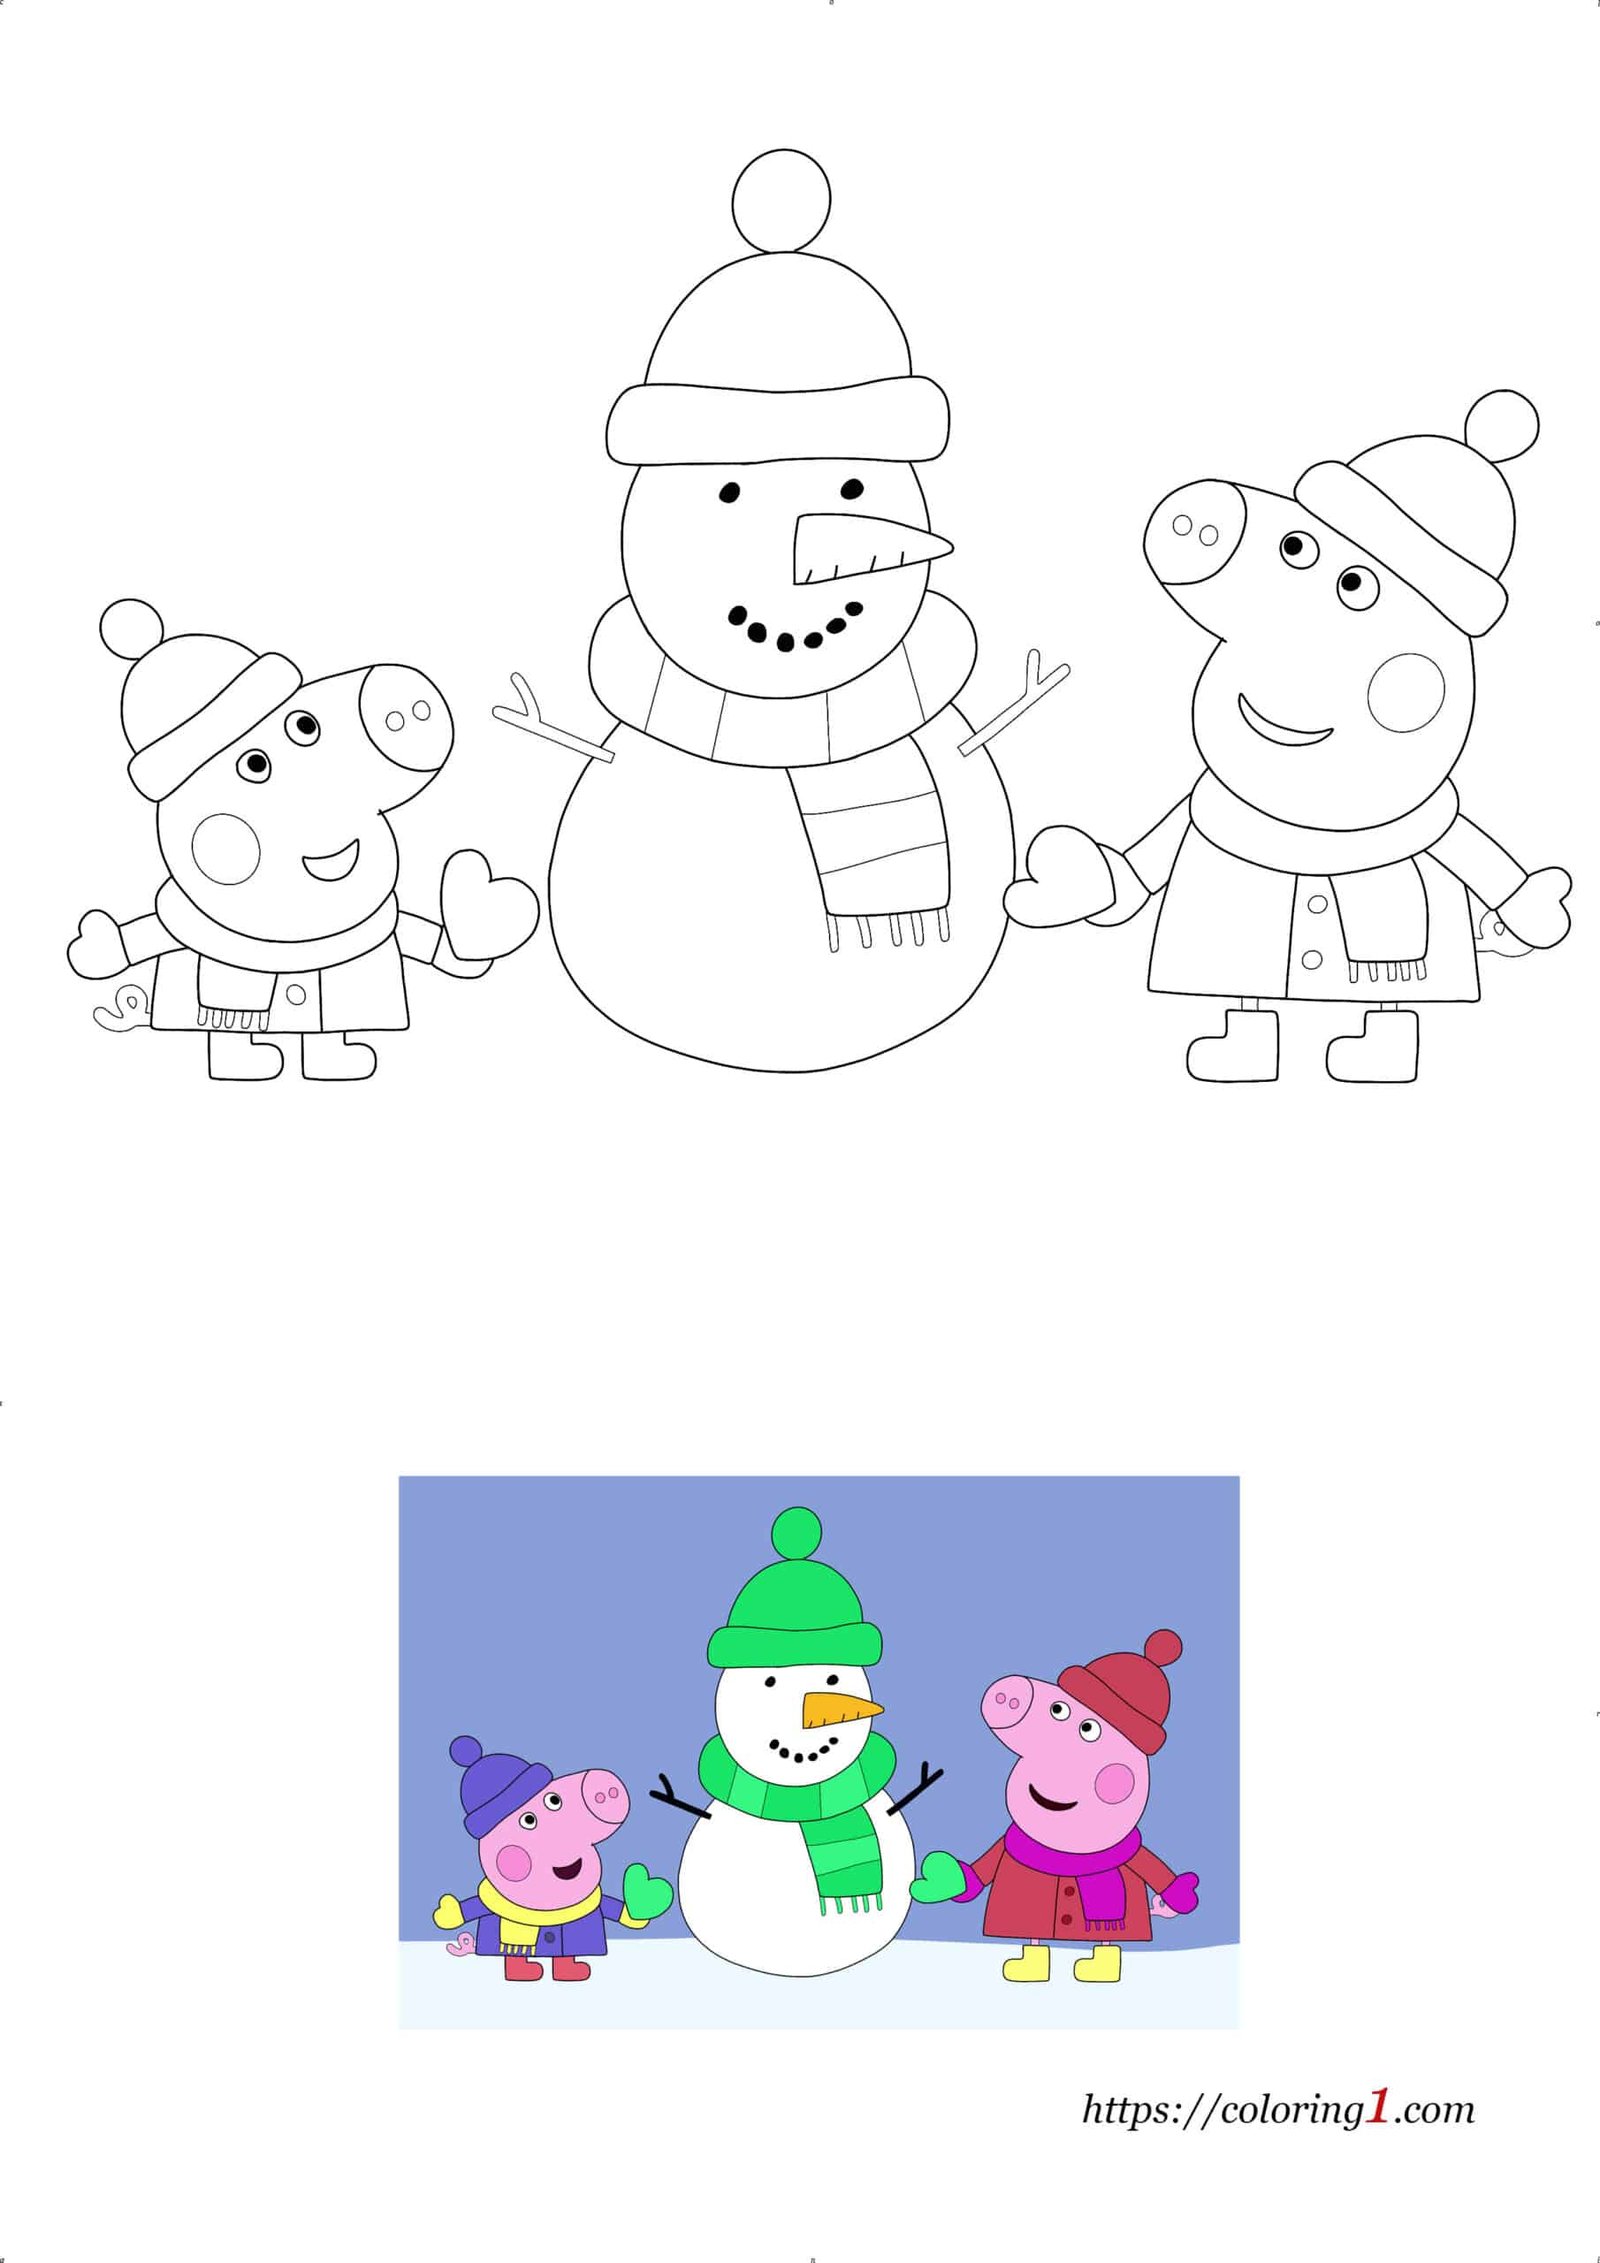 Peppa Pig and Snowman coloring page for kids to print